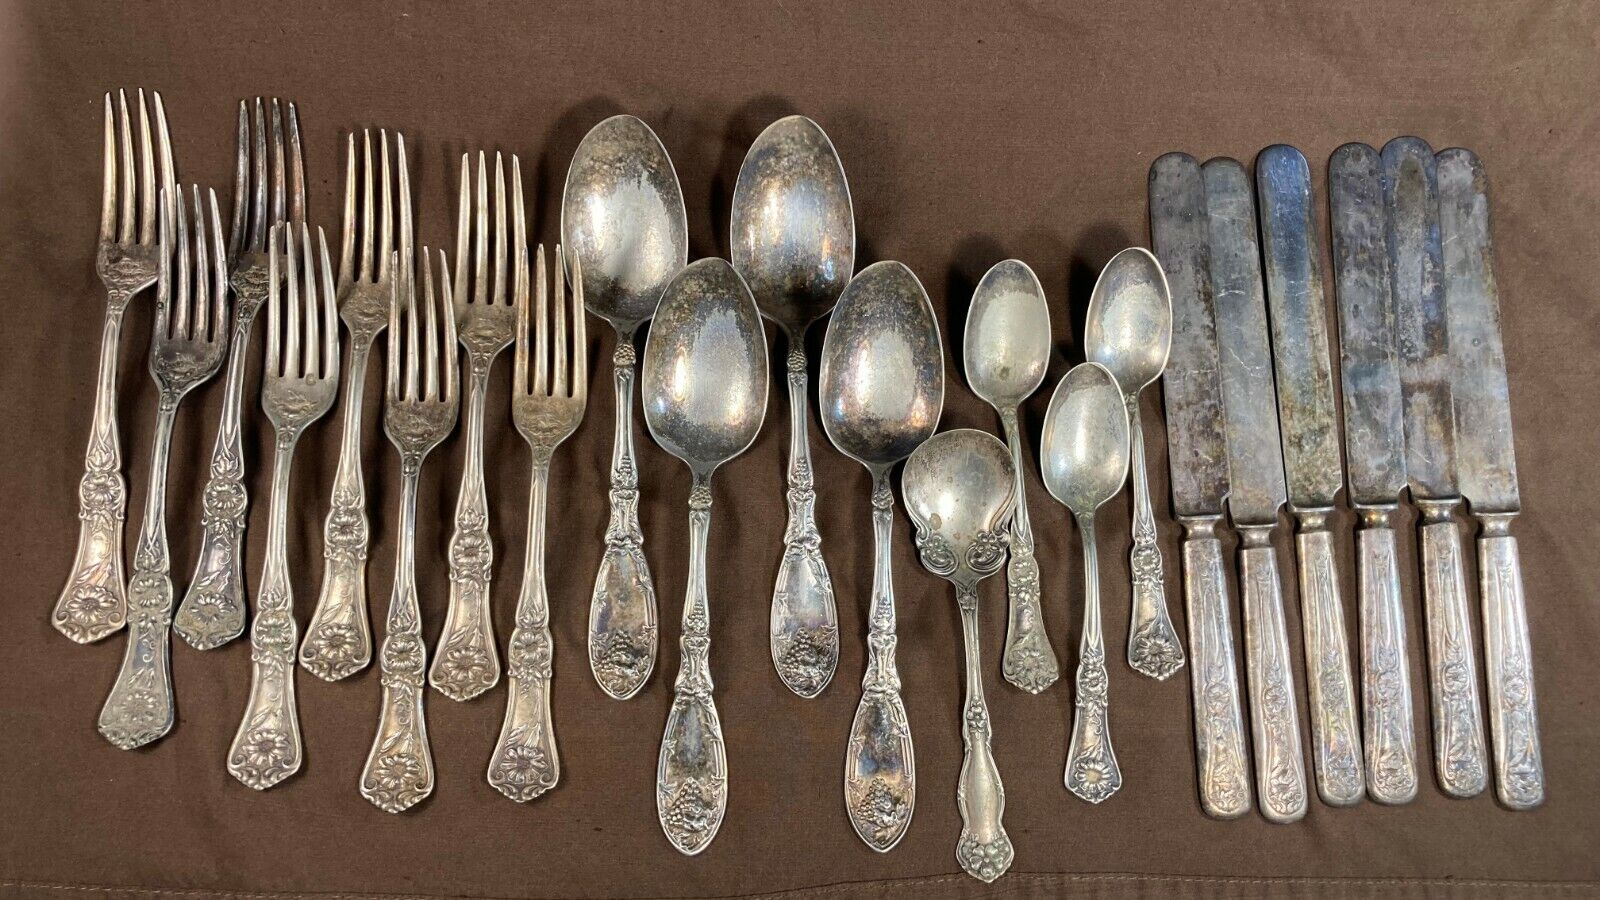 Lot of 1881 Rogers A1 Silverware Flatware Silver Plate Spoons Forks Knives